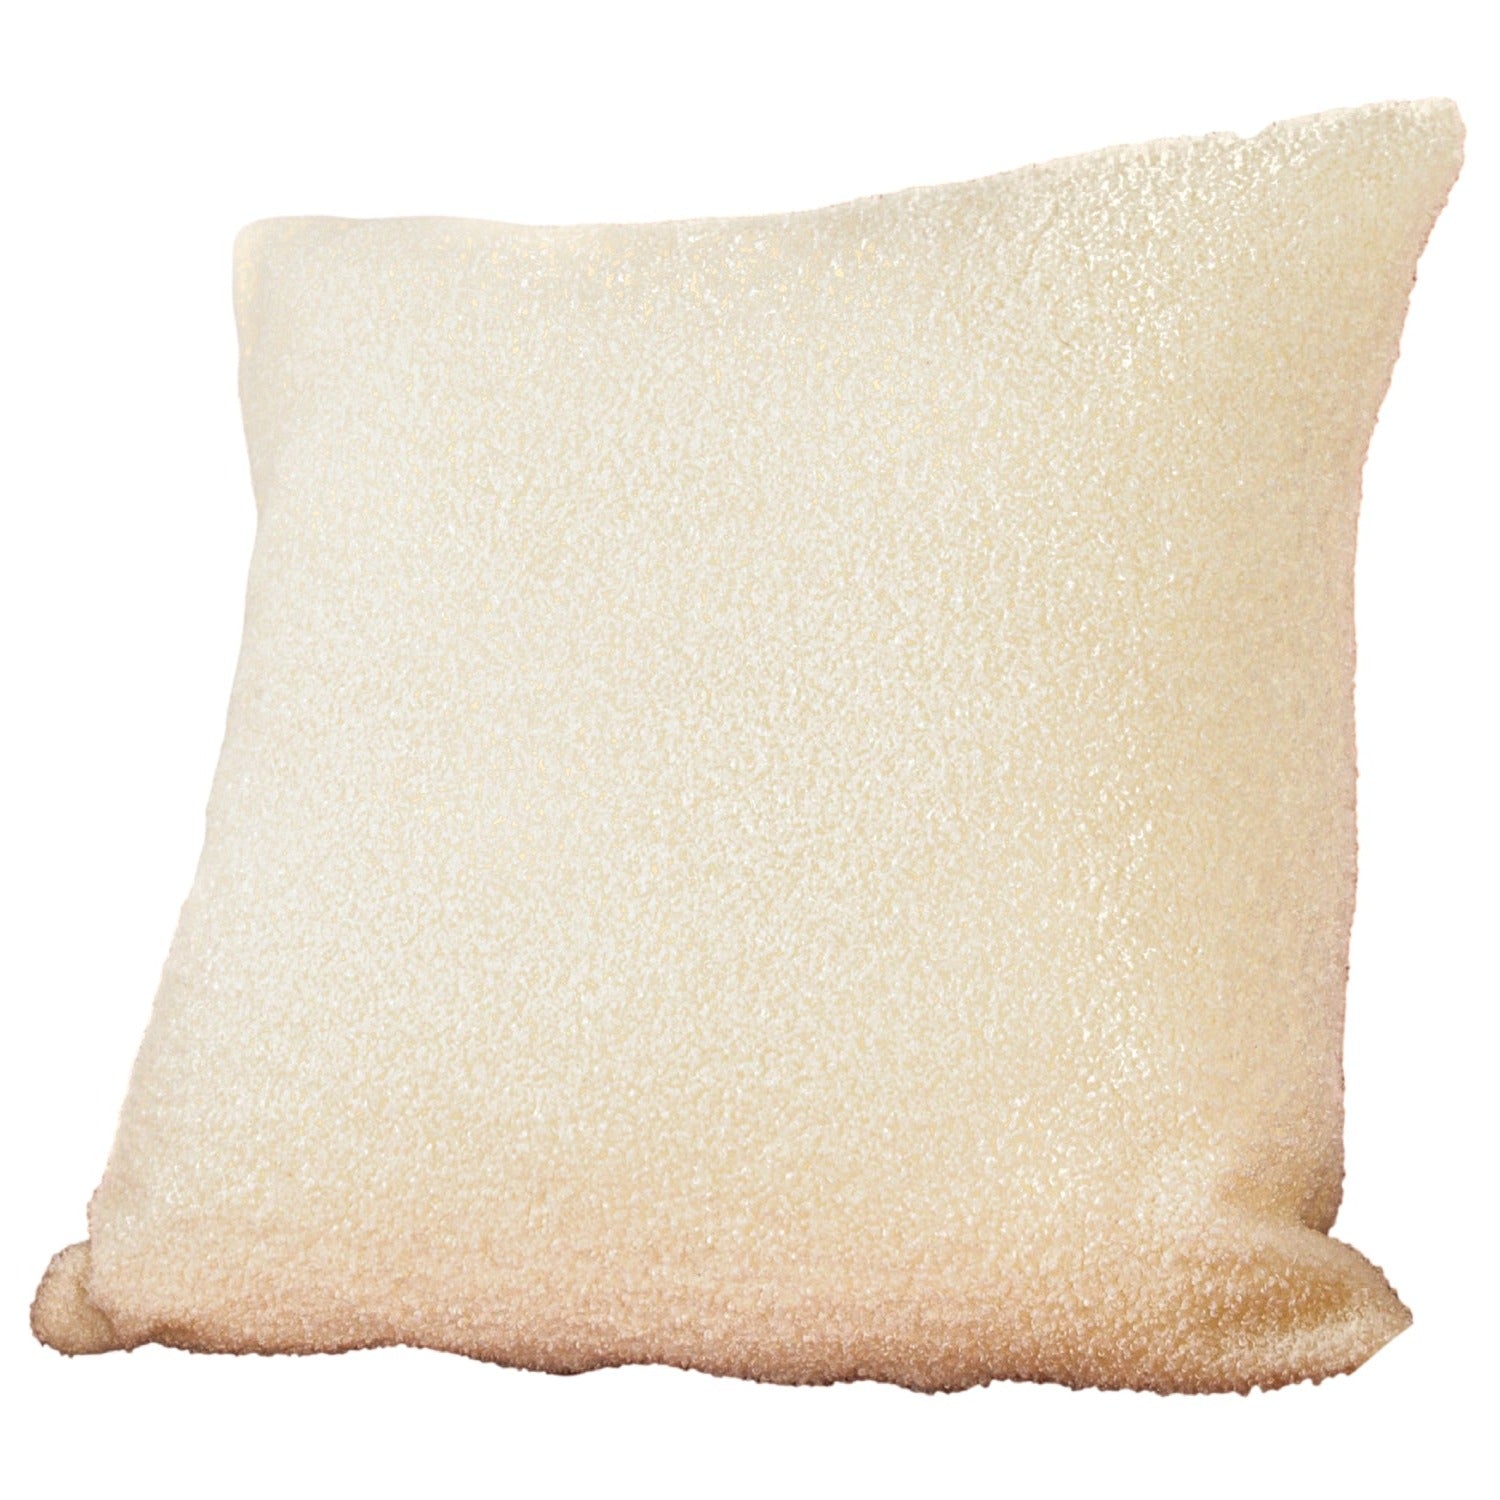 White teddy cushion cover by Native